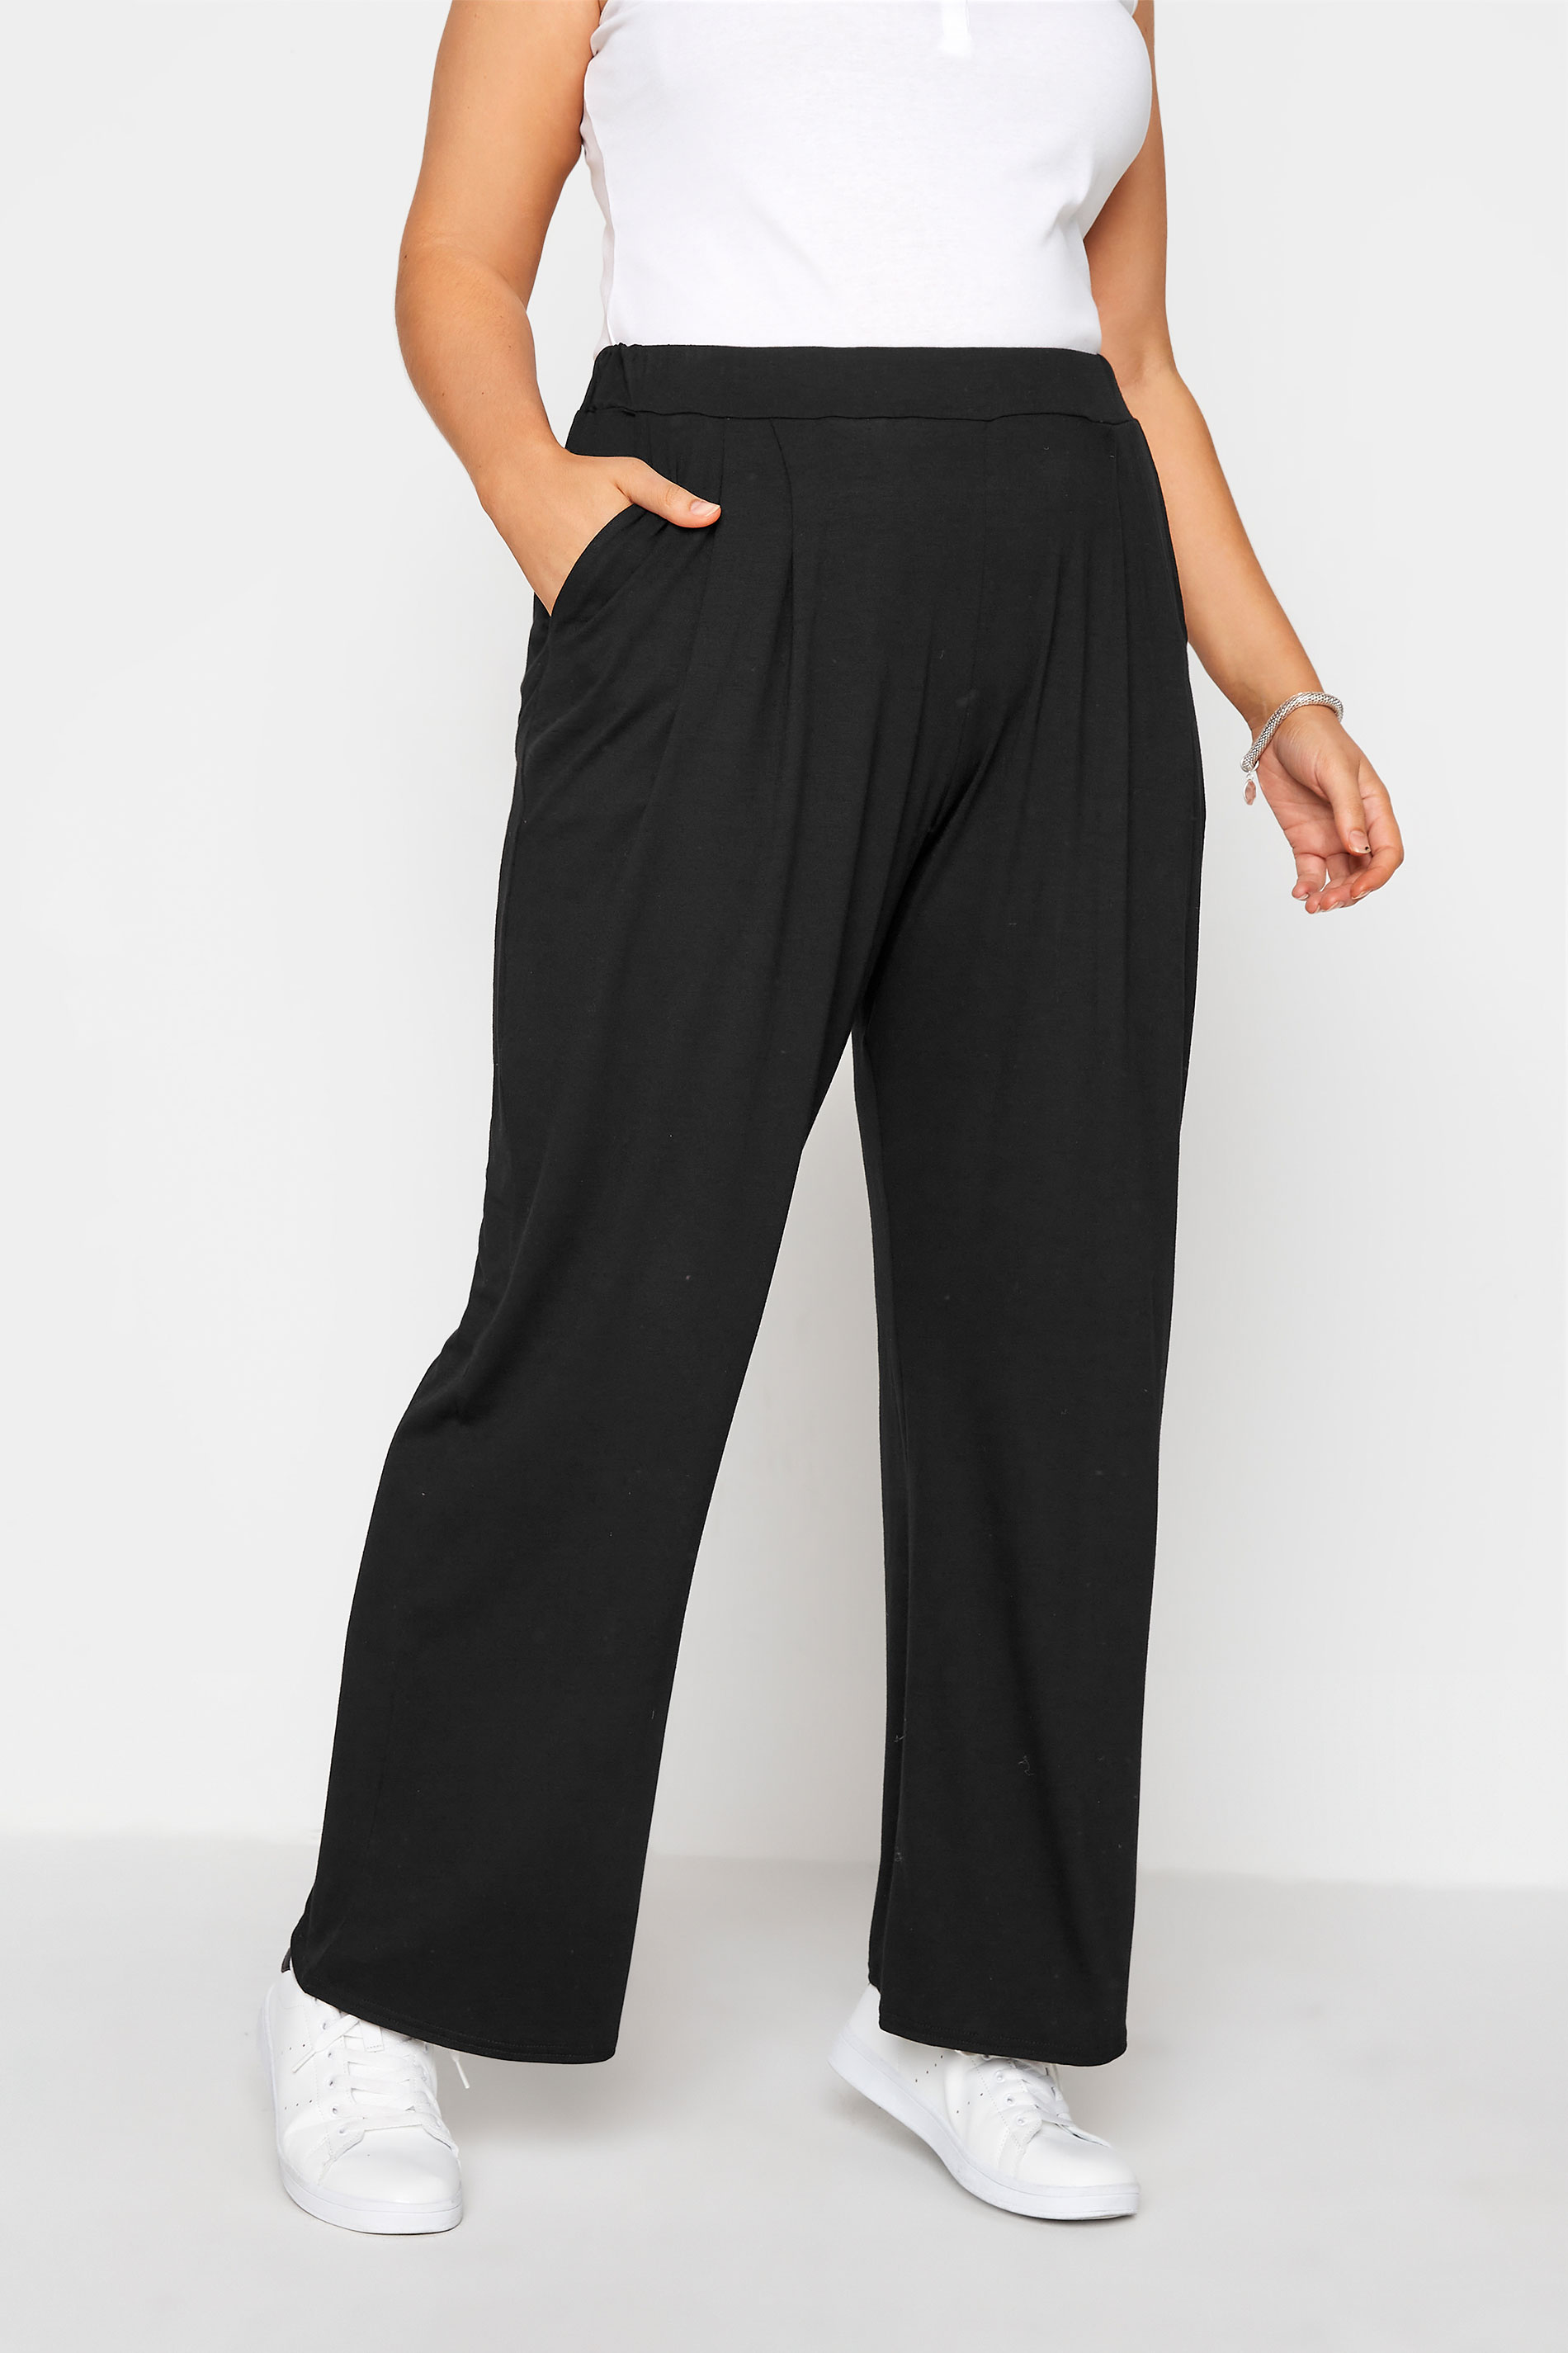 LIMITED COLLECTION Black Pleated Wide Leg Trousers_B.jpg